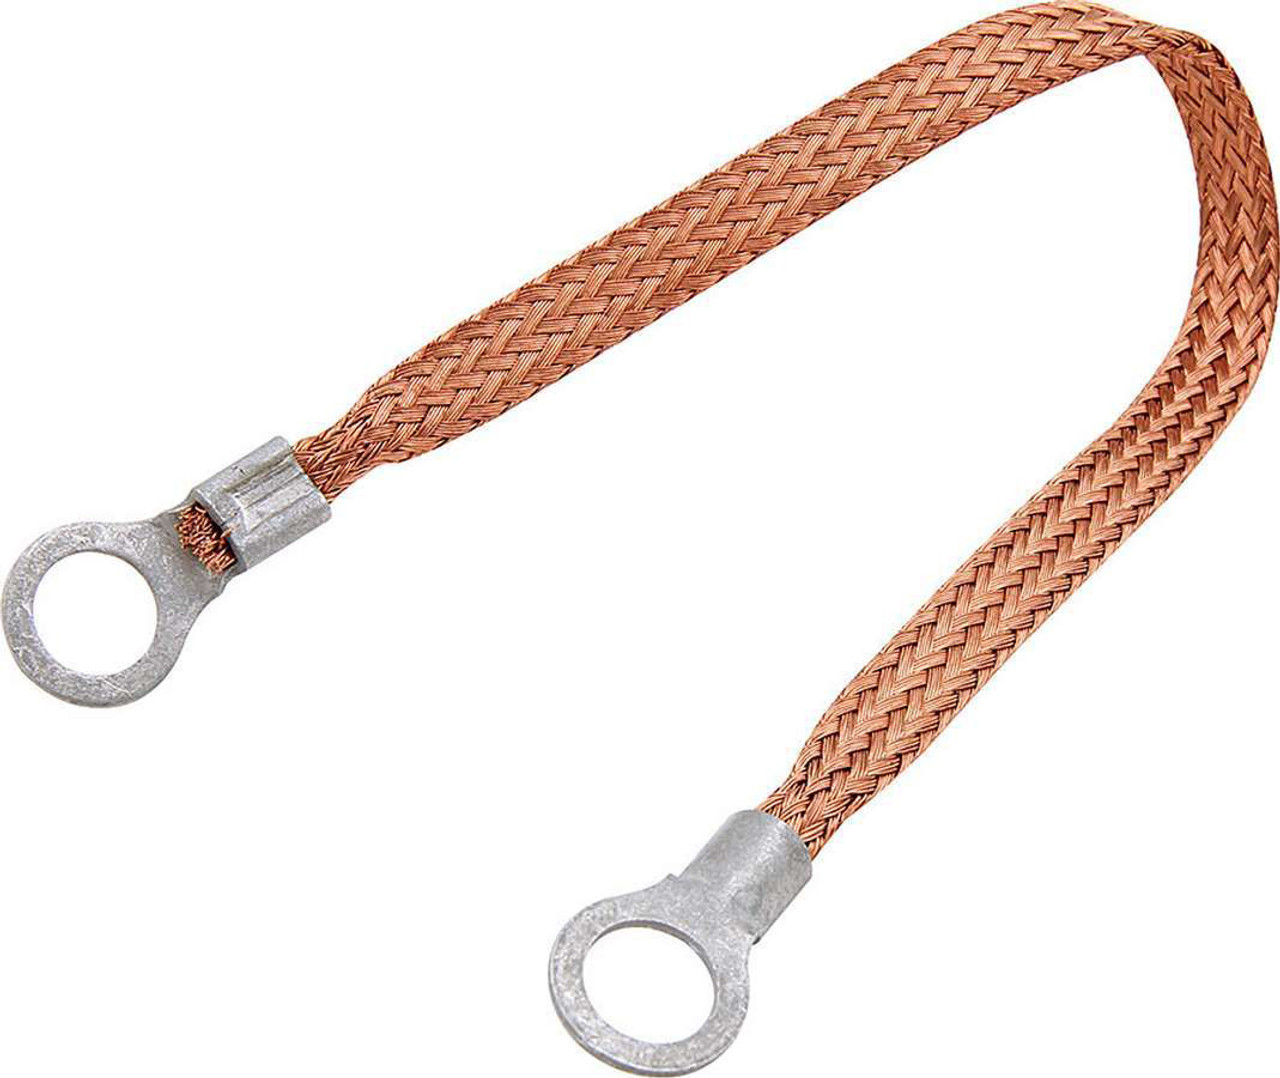 Copper Ground Strap 9in w/ 3/8in Ring Terminals